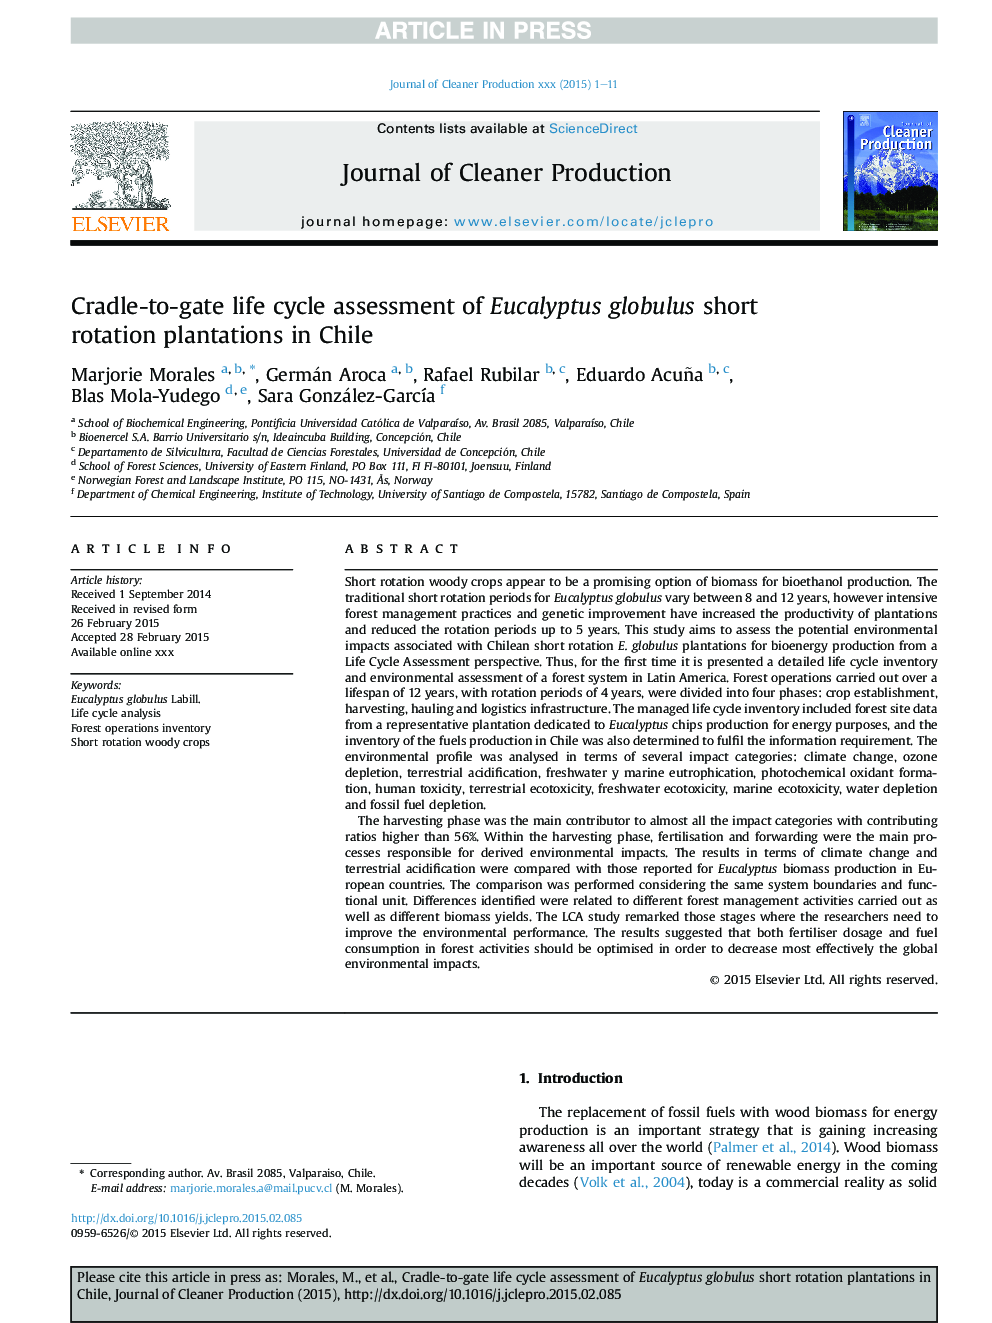 Cradle-to-gate life cycle assessment of Eucalyptus globulus short rotation plantations in Chile